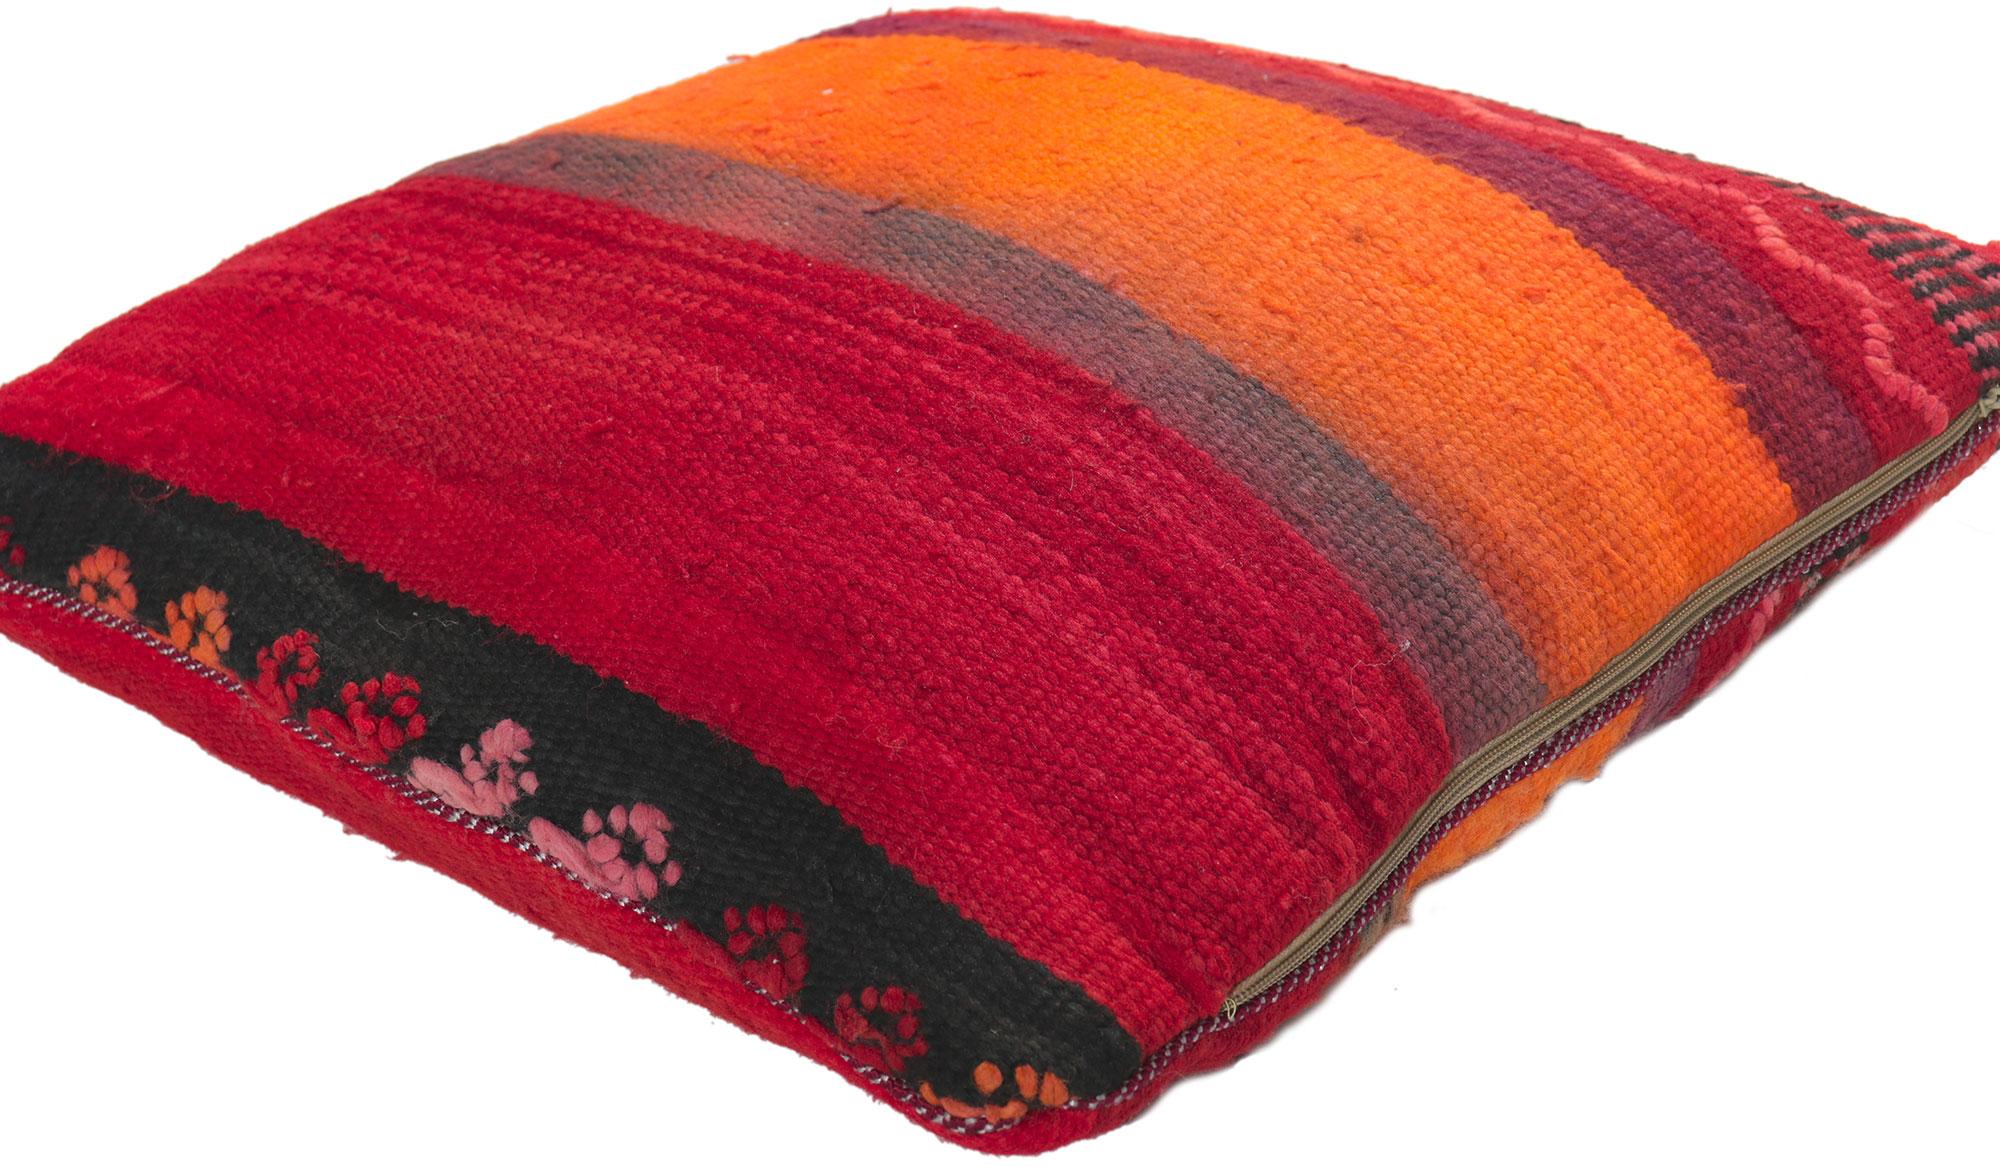 78441 Vintage Moroccan Rug Pillow, 01'05 x 01'06 x 00'04. Emanating nomadic charm with elements of comfort and functional versatility, this vintage Moroccan pillow conjures the spirit of Morocco. Made by talented artisans of the Zemmour Tribe in